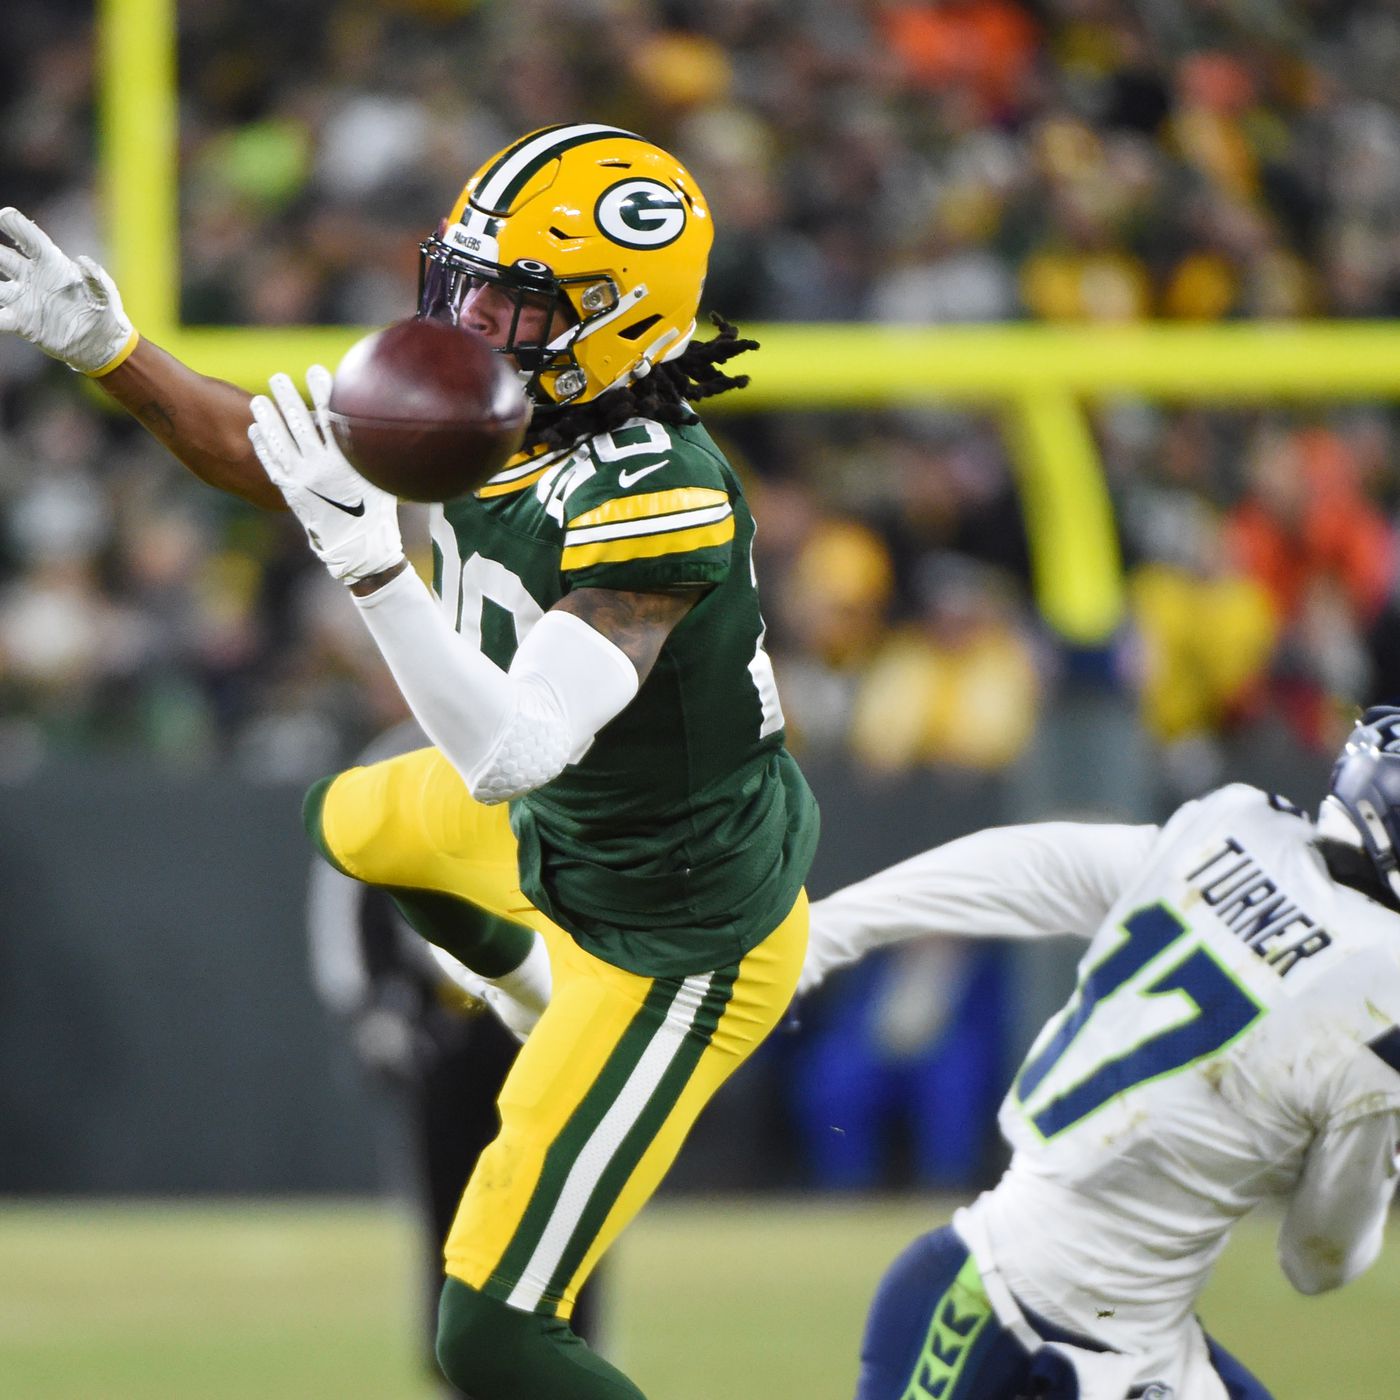 Packers 2019 Roster grades: Jaire Alexander & Kevin King produced a mostly solid season - Acme Packing Company